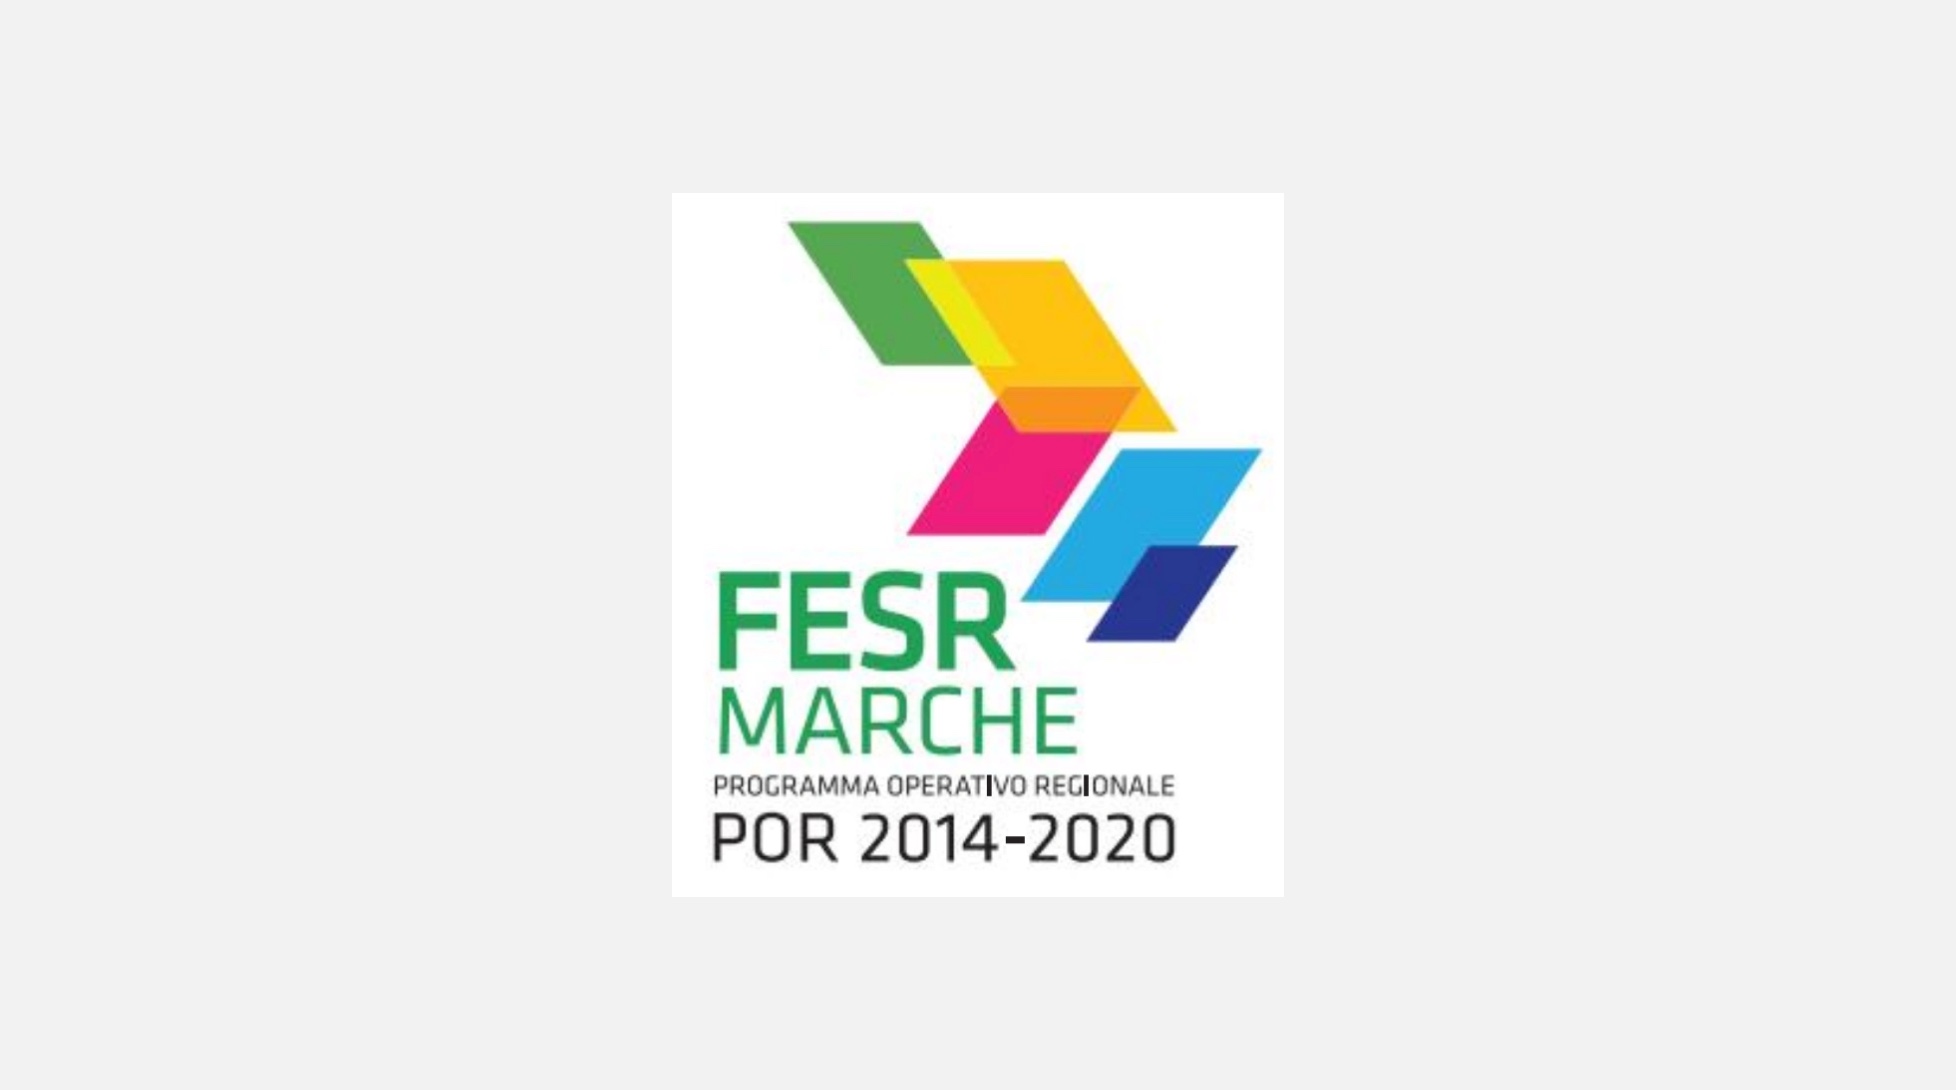 Jeg-Sustainable shoes for innovative people – FESR Marche POR 2014-2020